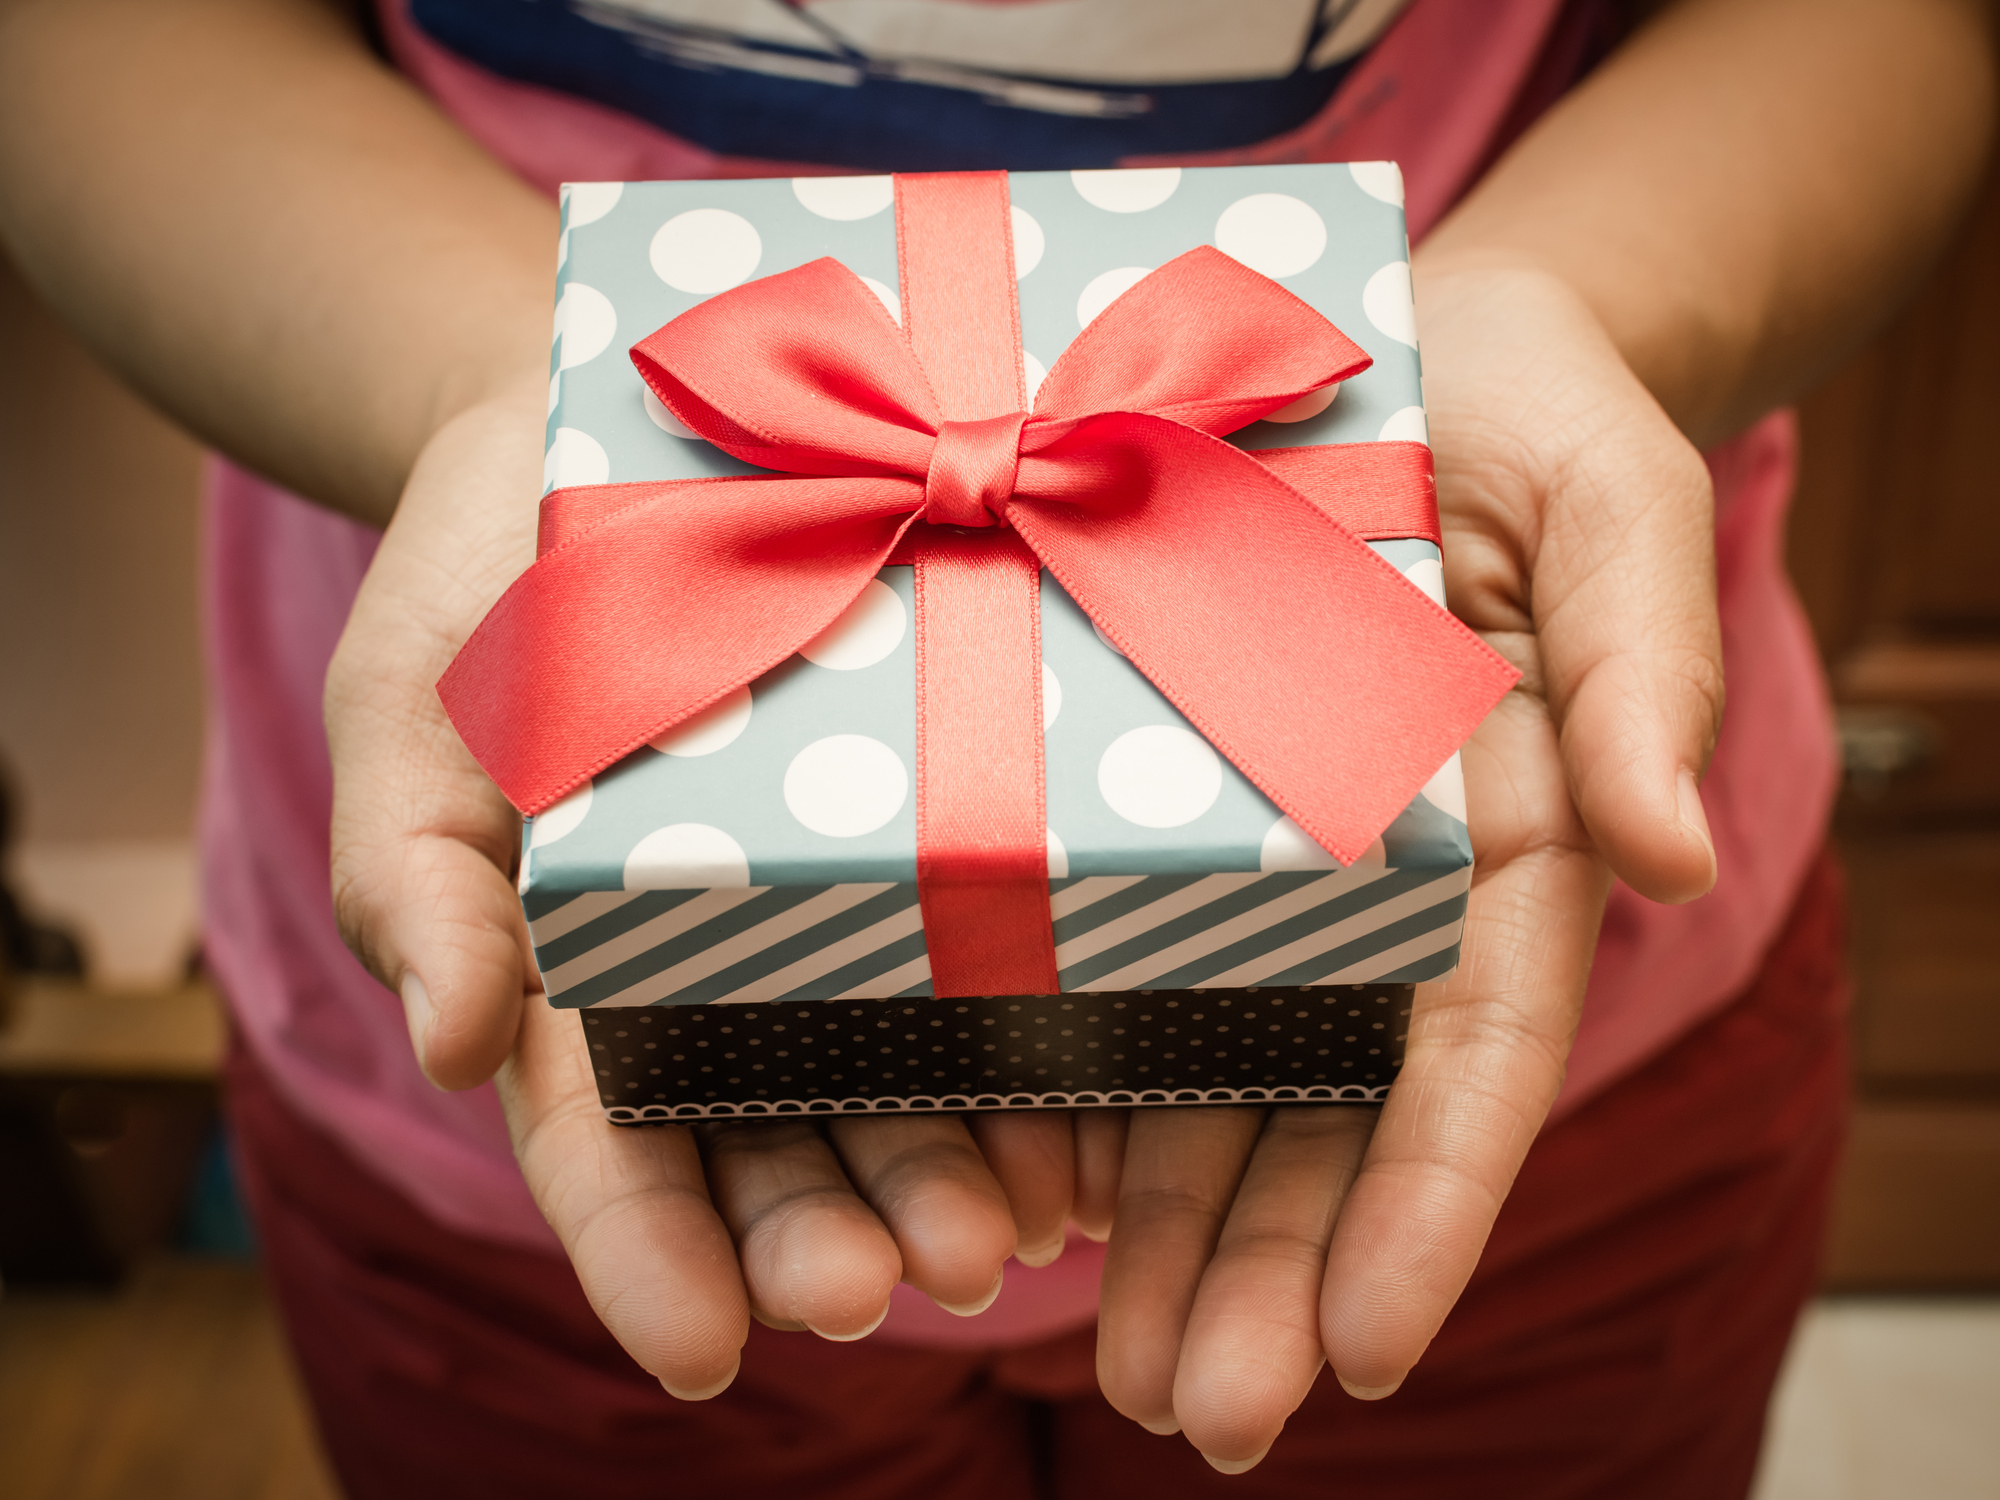 Woman holds a wrapped gift